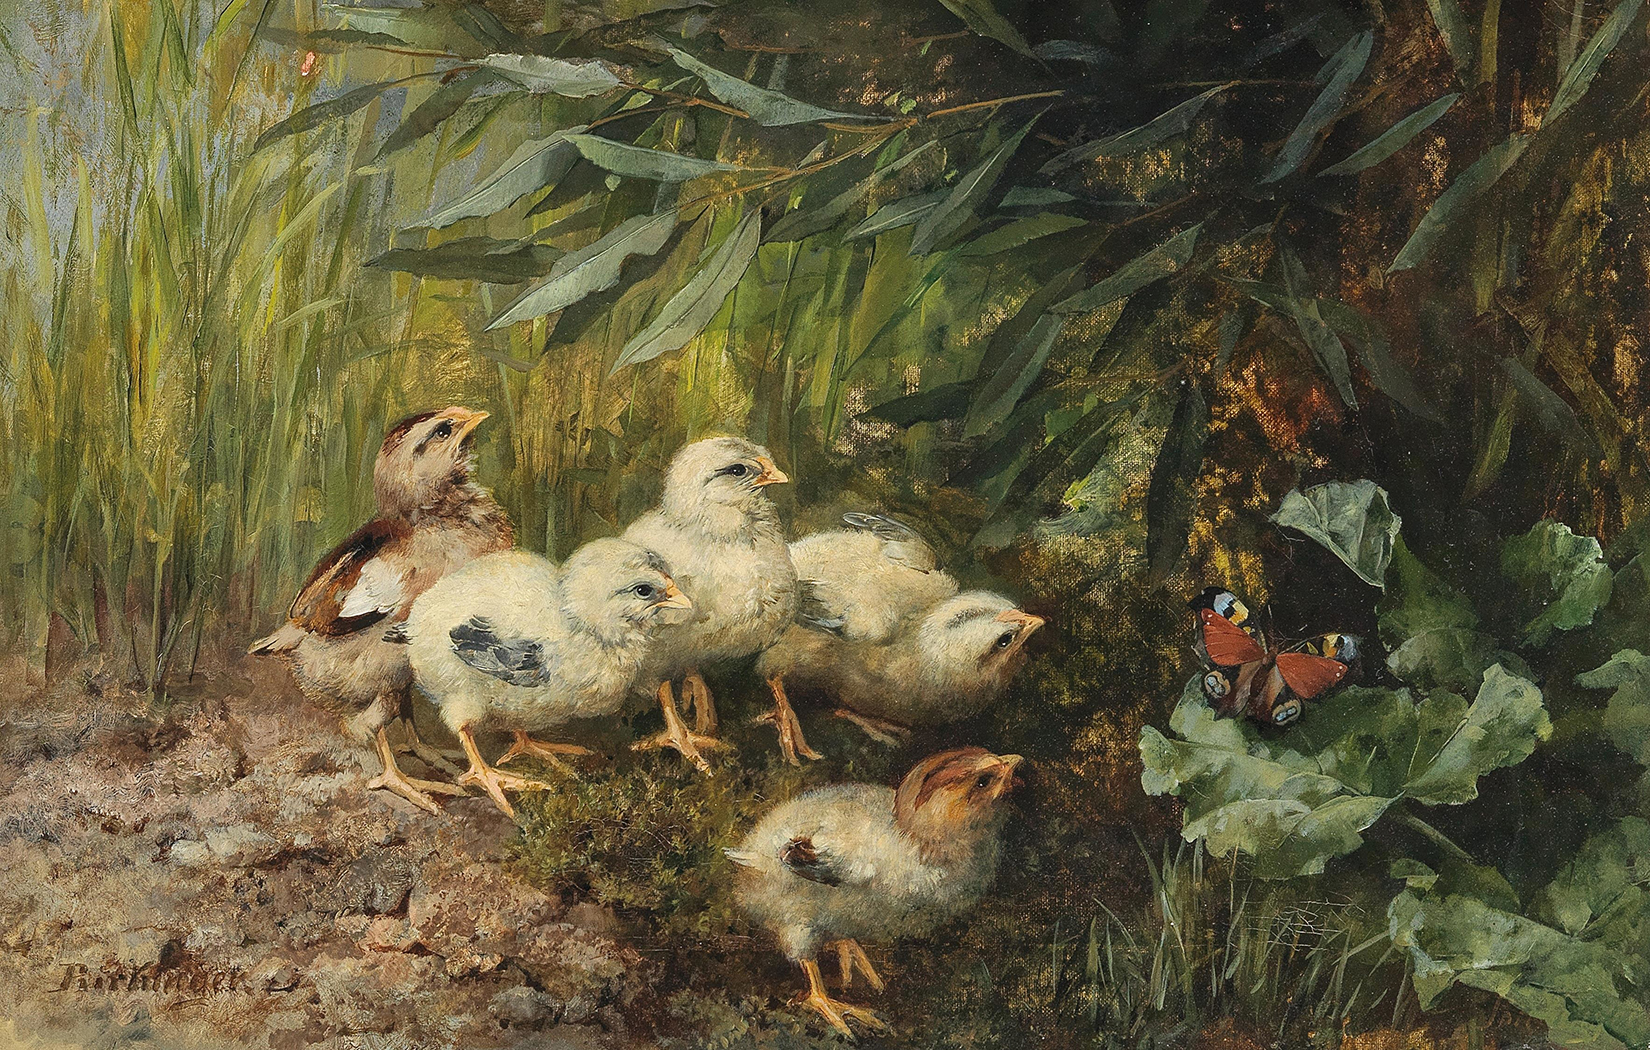 Farm/Pastoral Farm Chicks and Butterfly Framed Oil Painti ...